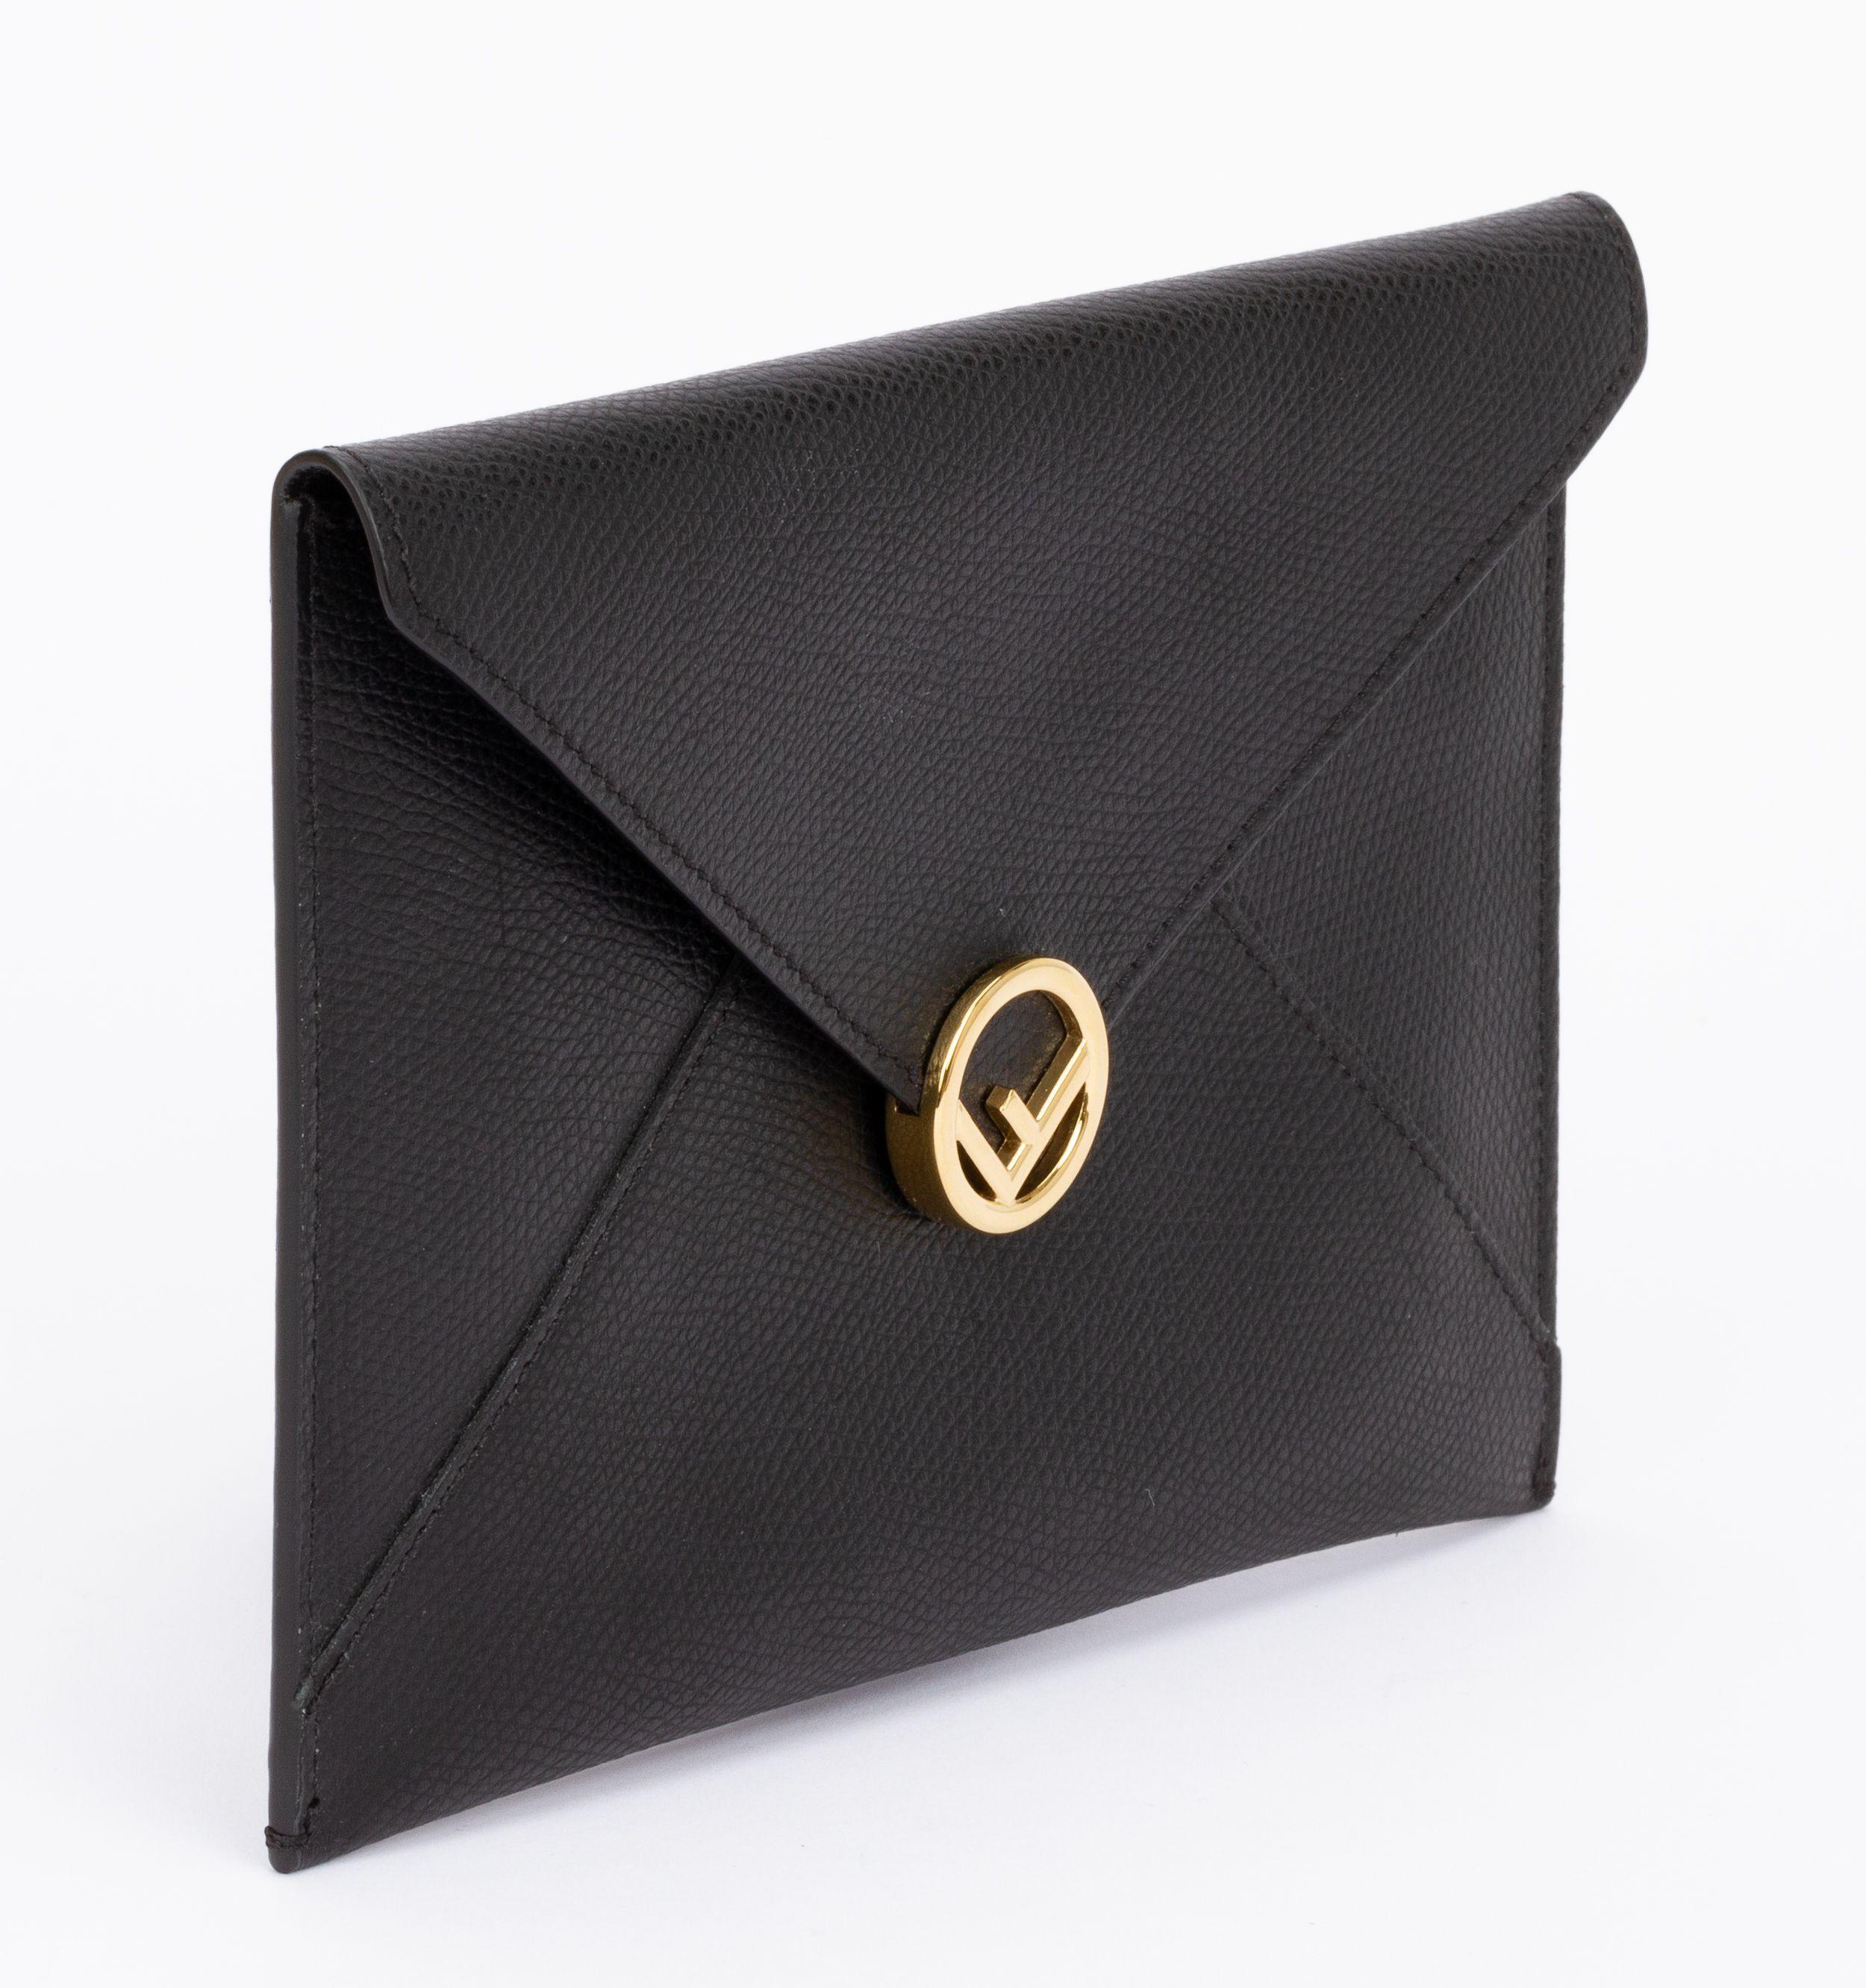 Fendi Calfskin medium flat envelope pouch in black. This pouch is made of textured calfskin leather. The top envelope flap snaps open to a matching leather interior. It closes with a push button which is gold and shows a circled F. The piece is new